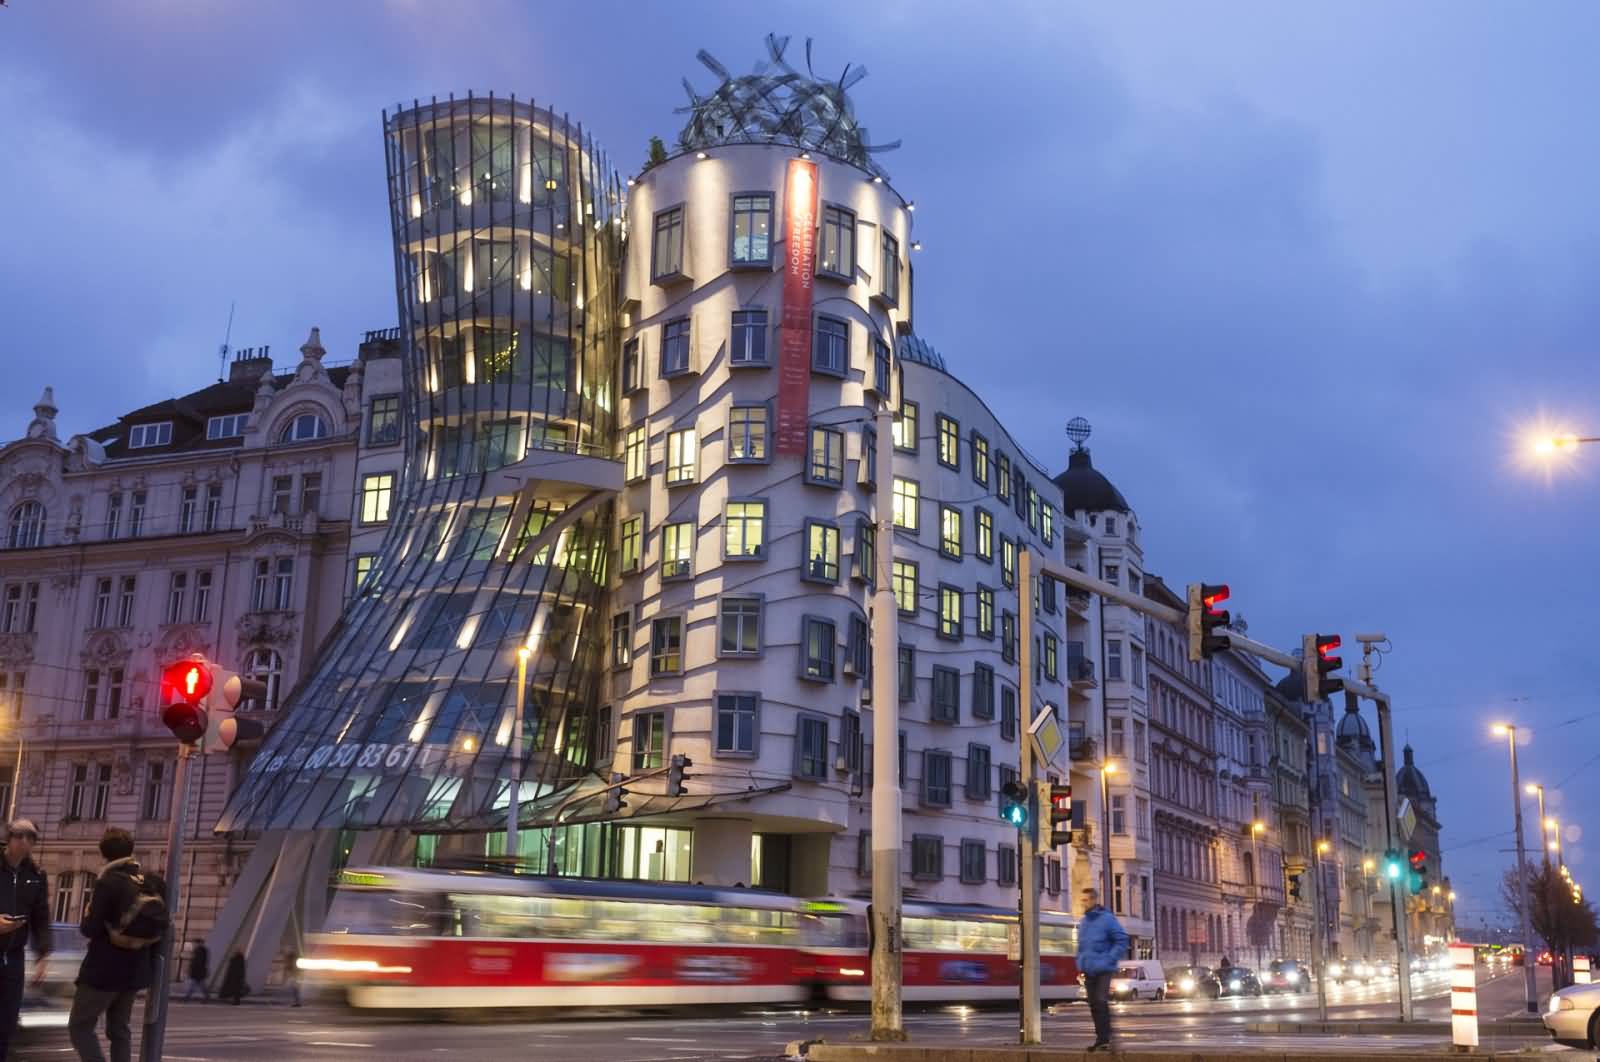 The Dancing House Looks Adorable At Dusk